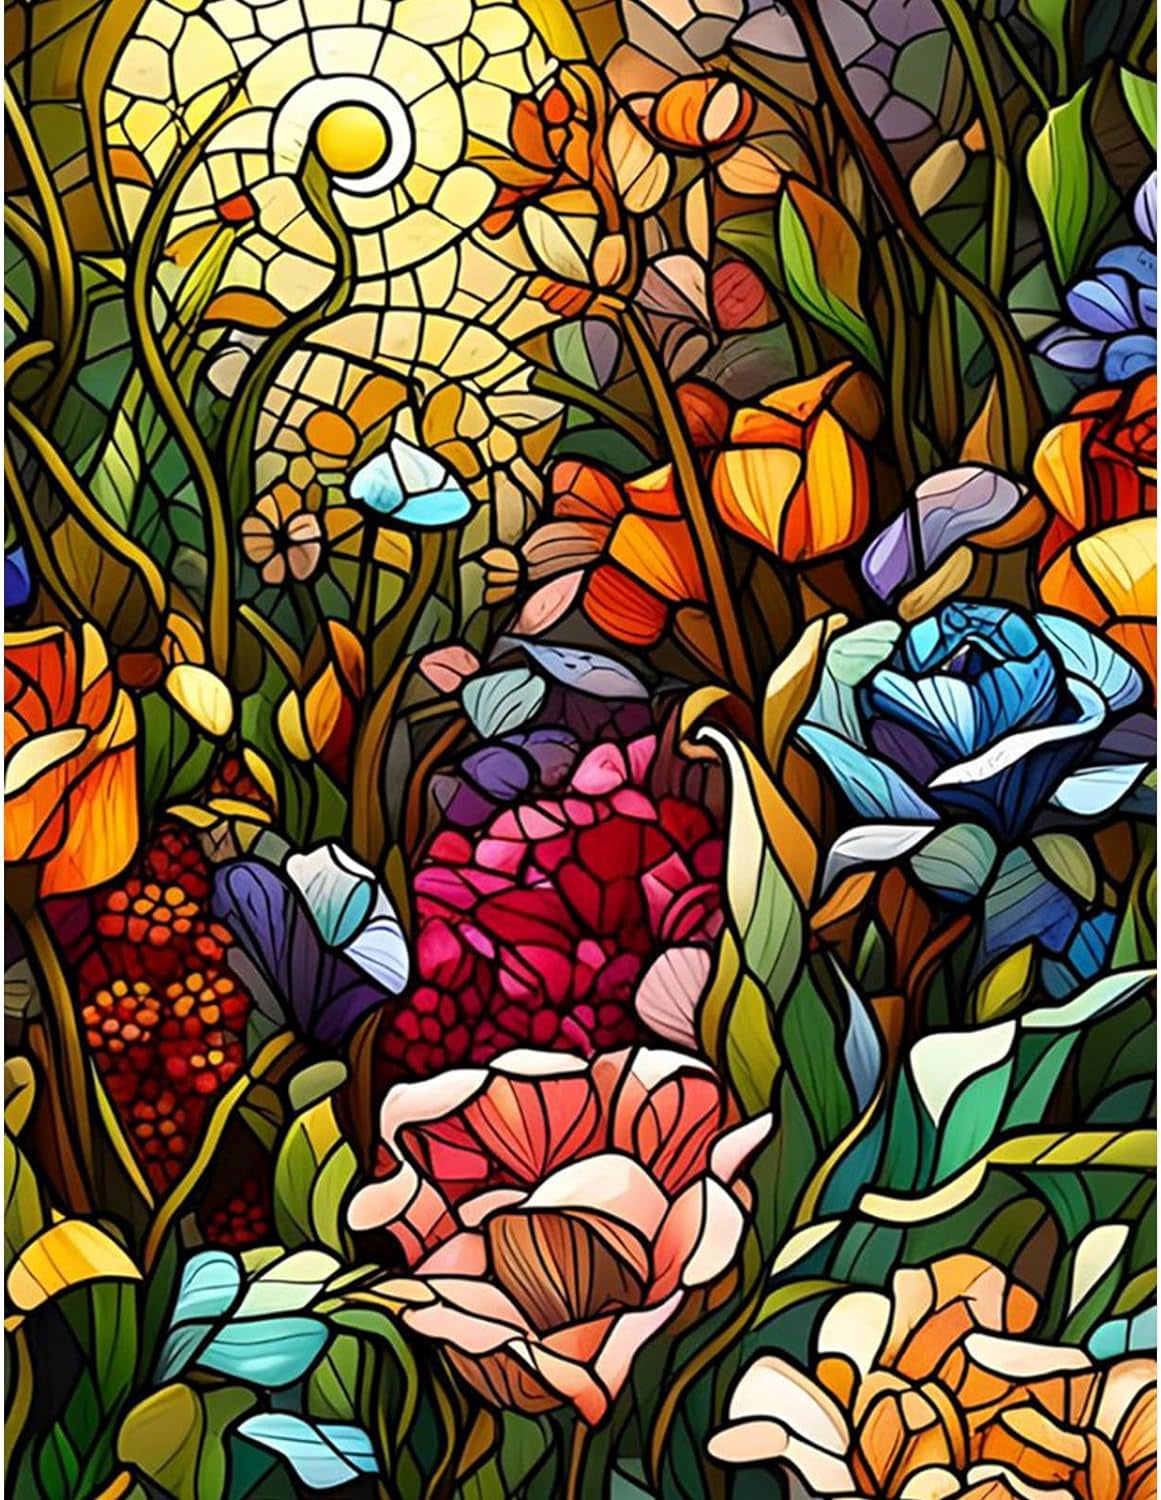 Flower Paint by Number for Adults, Paint by Numbers Kit for Adults Beginner Flowers, DIY Acrylic Stained Glass Paint by Number on Canvas Floral Artwork Gift Home Wall Decor 16” W X 20”L